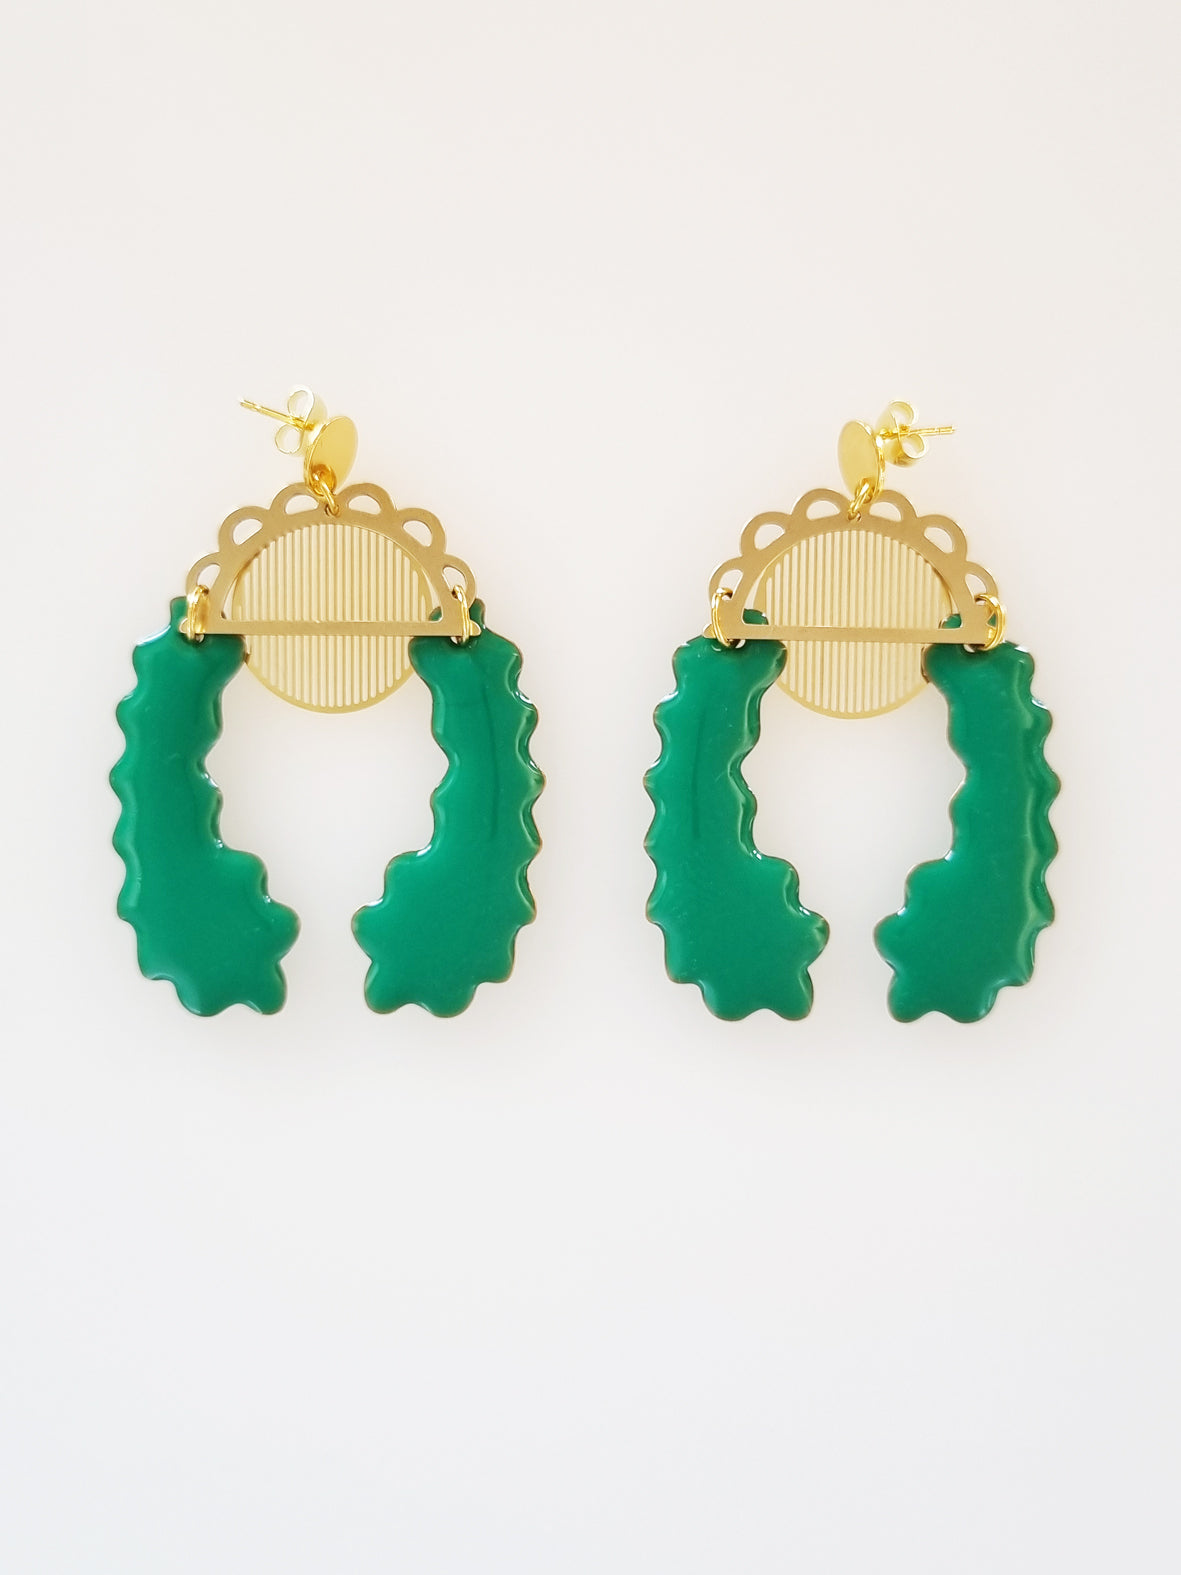 A pair of stud dangle earrings lay on a white background. Both earrings feature a semi circle piece of brass with scalloped detailing around the top curve. Behind that is a delicate circle piece of brass with thin lines cut vertically. A long emerald green piece of enamel that has wavy edges is connected to the left of the brass semi-circle with a jump ring. A second enamel piece in the same shape is mirrored and connected to the right side of the brass semi-circle.